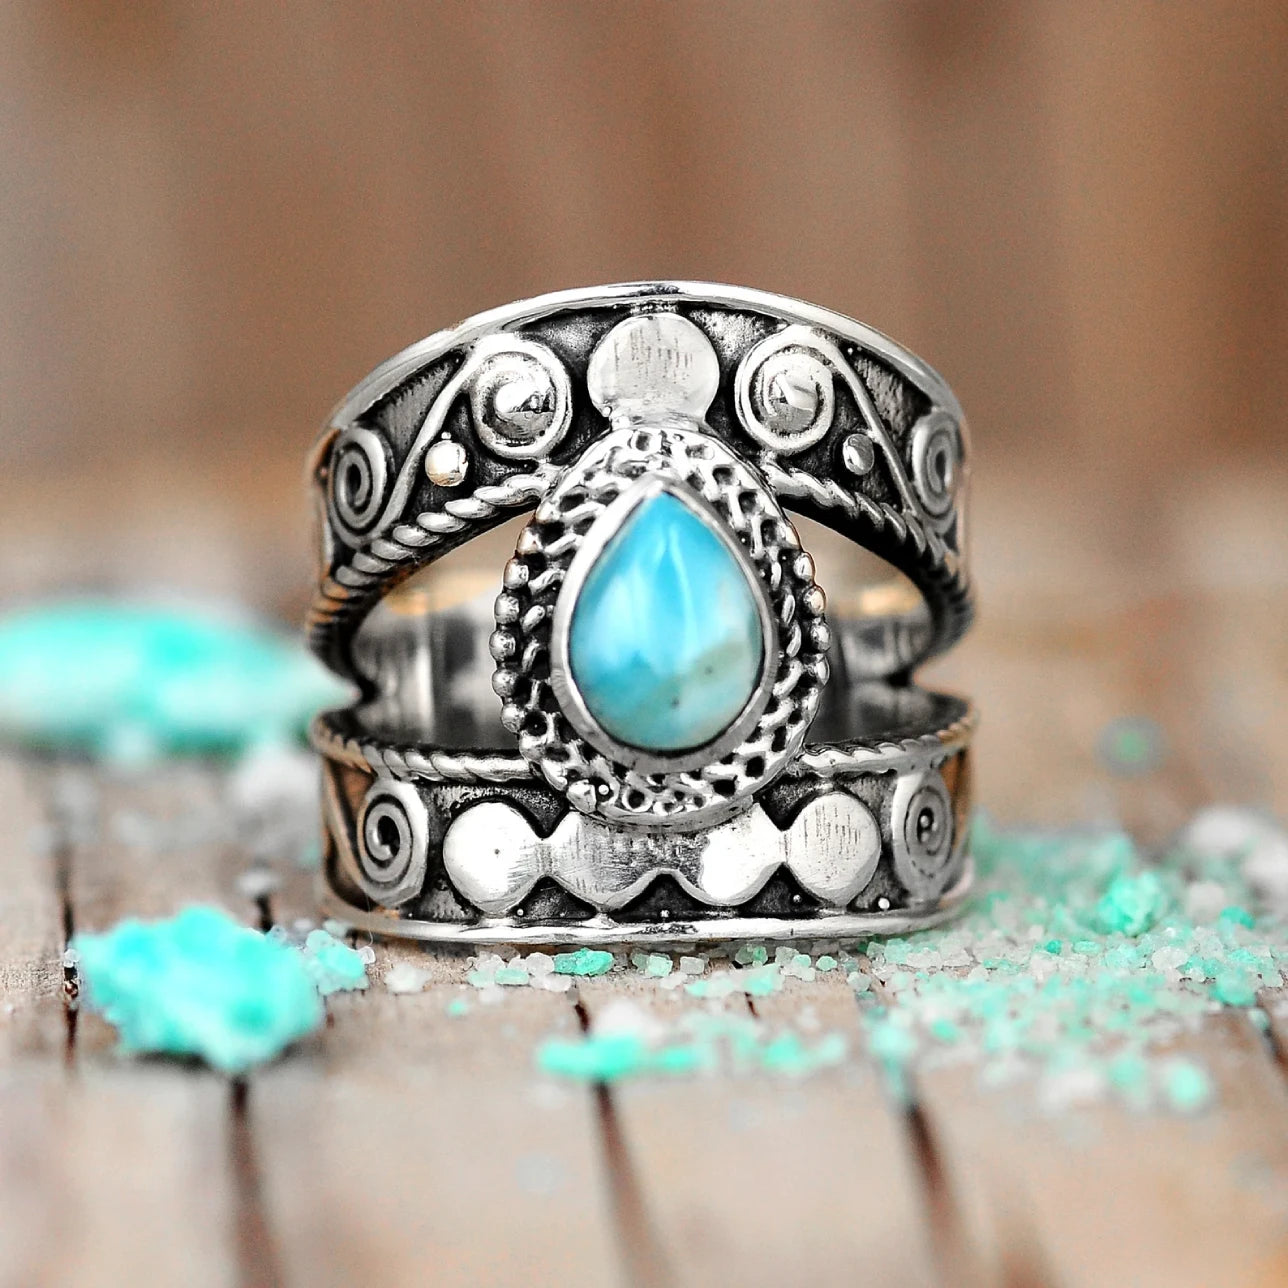 Larimar meaning: What is larimar and its healing properties?